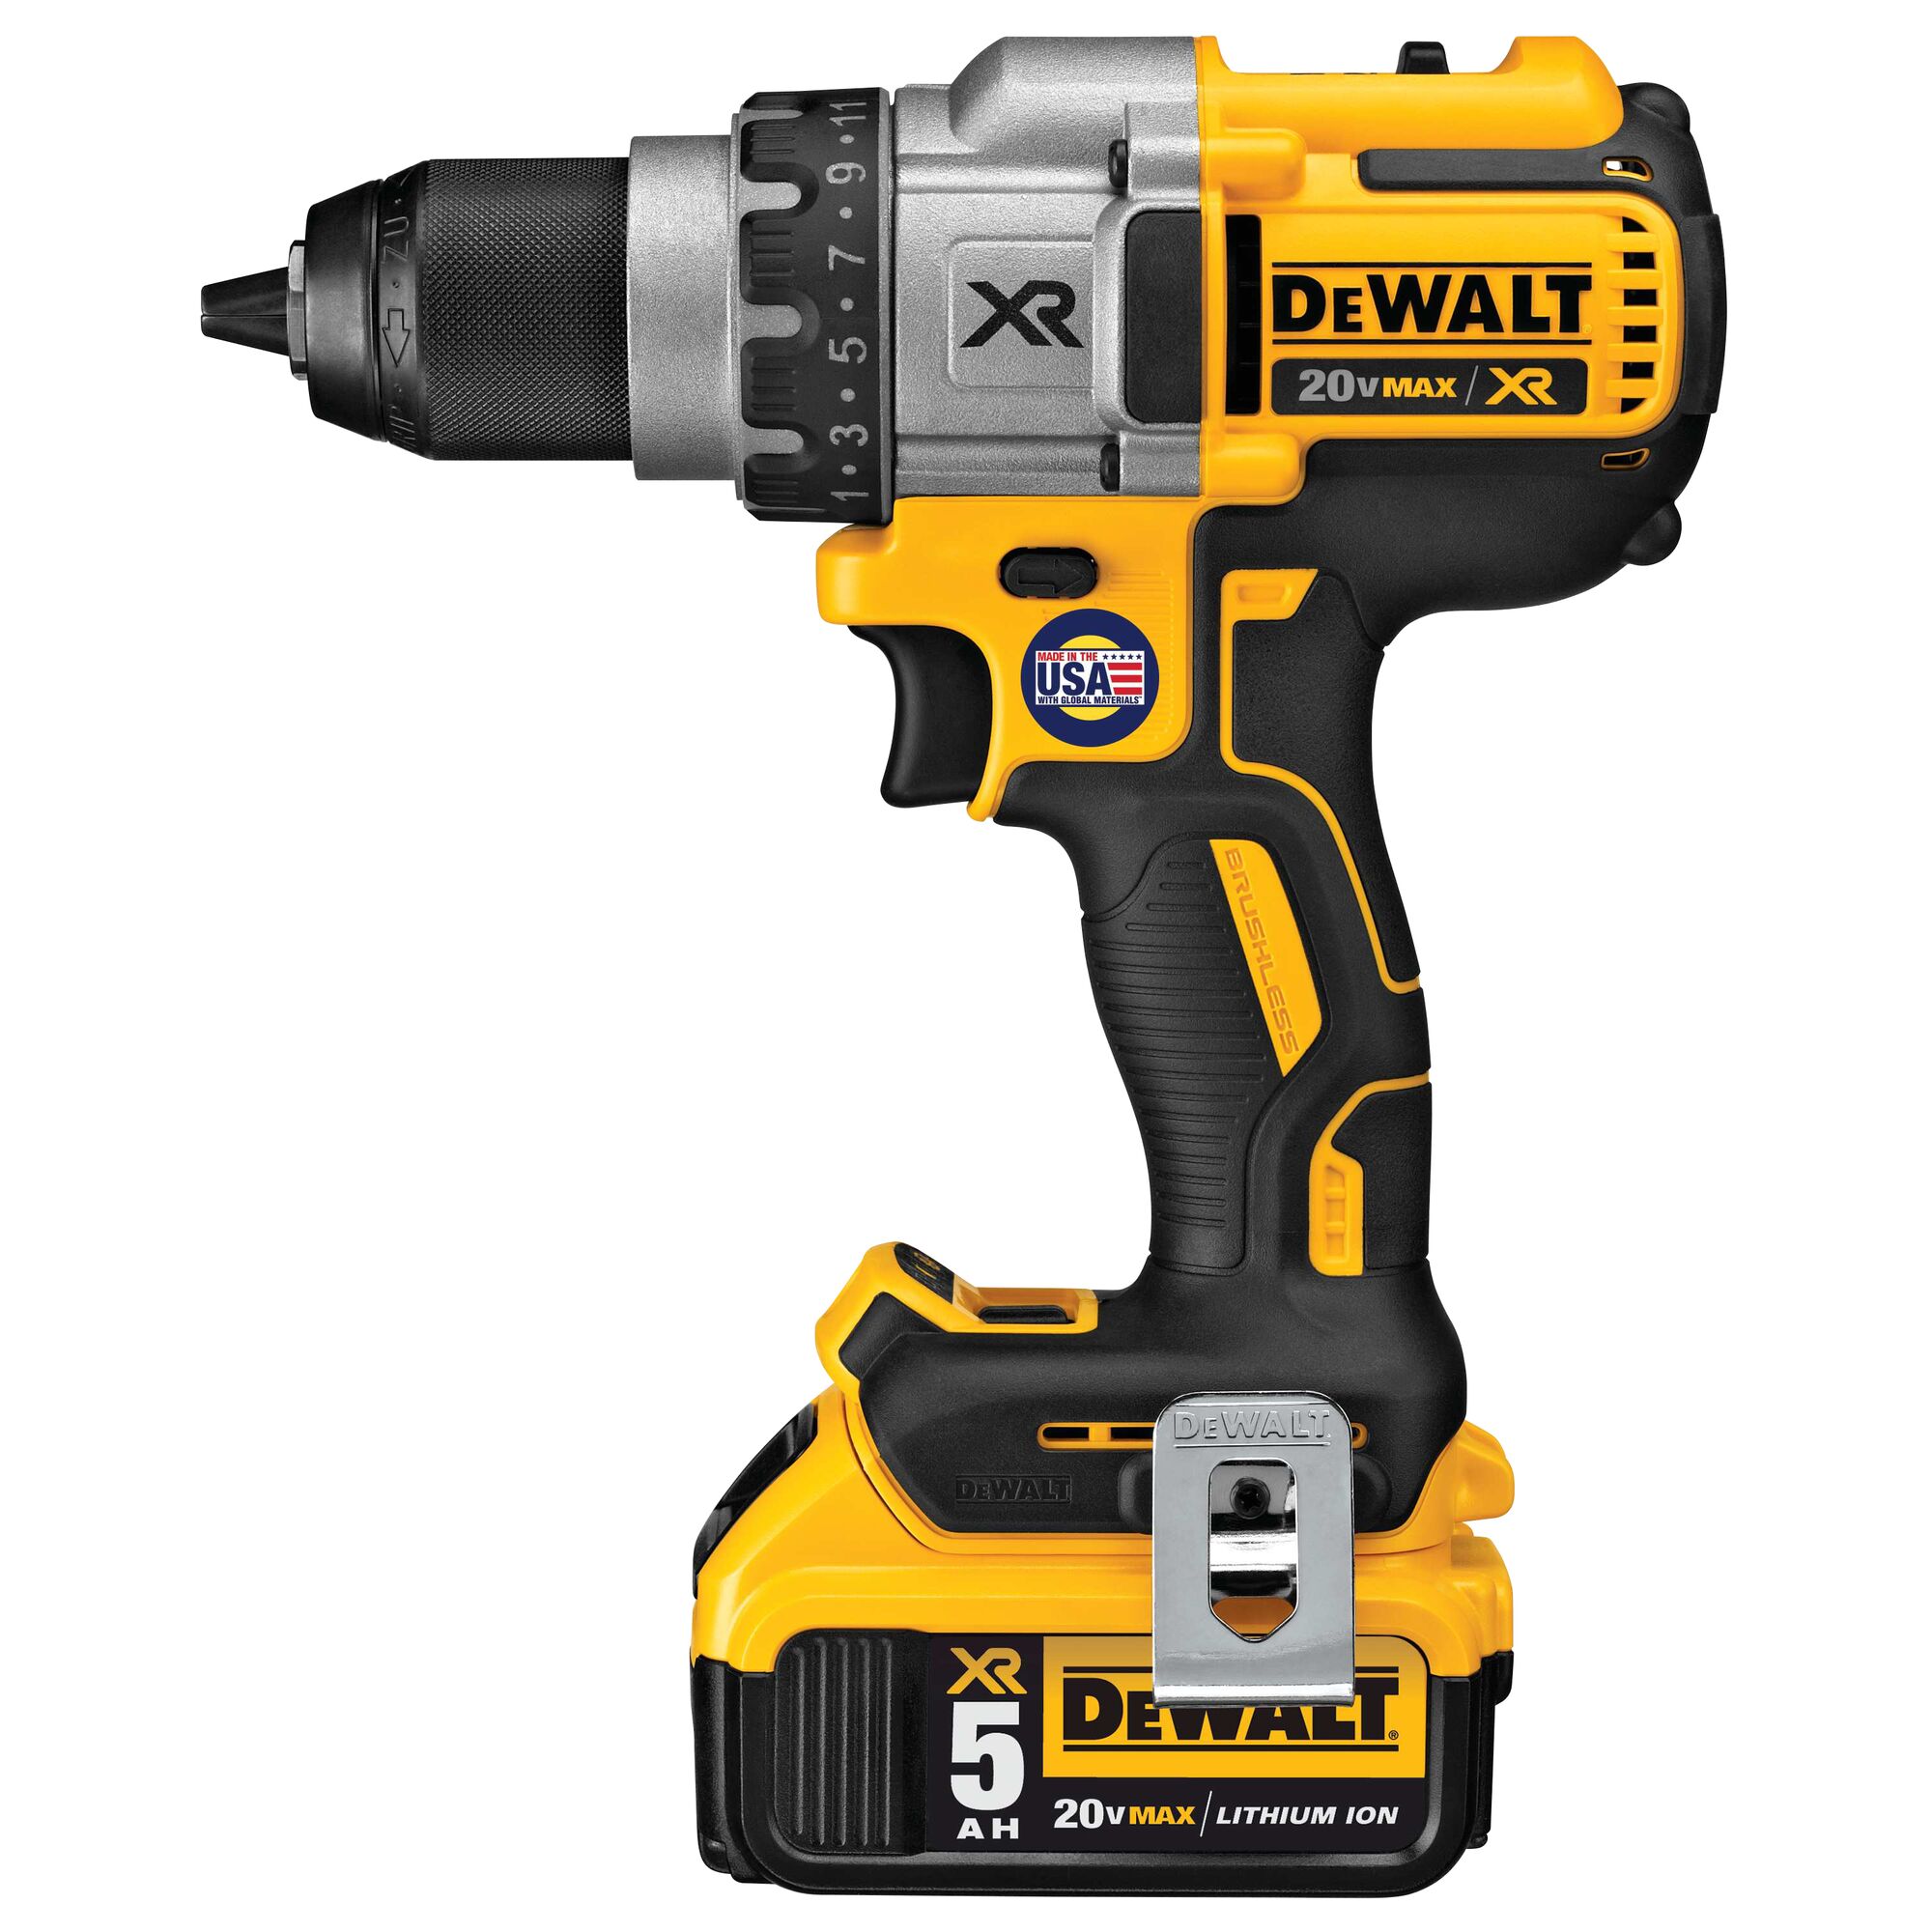 Upgraded Cordless Heat Gun for Dewalt 20v Battery, with LCD